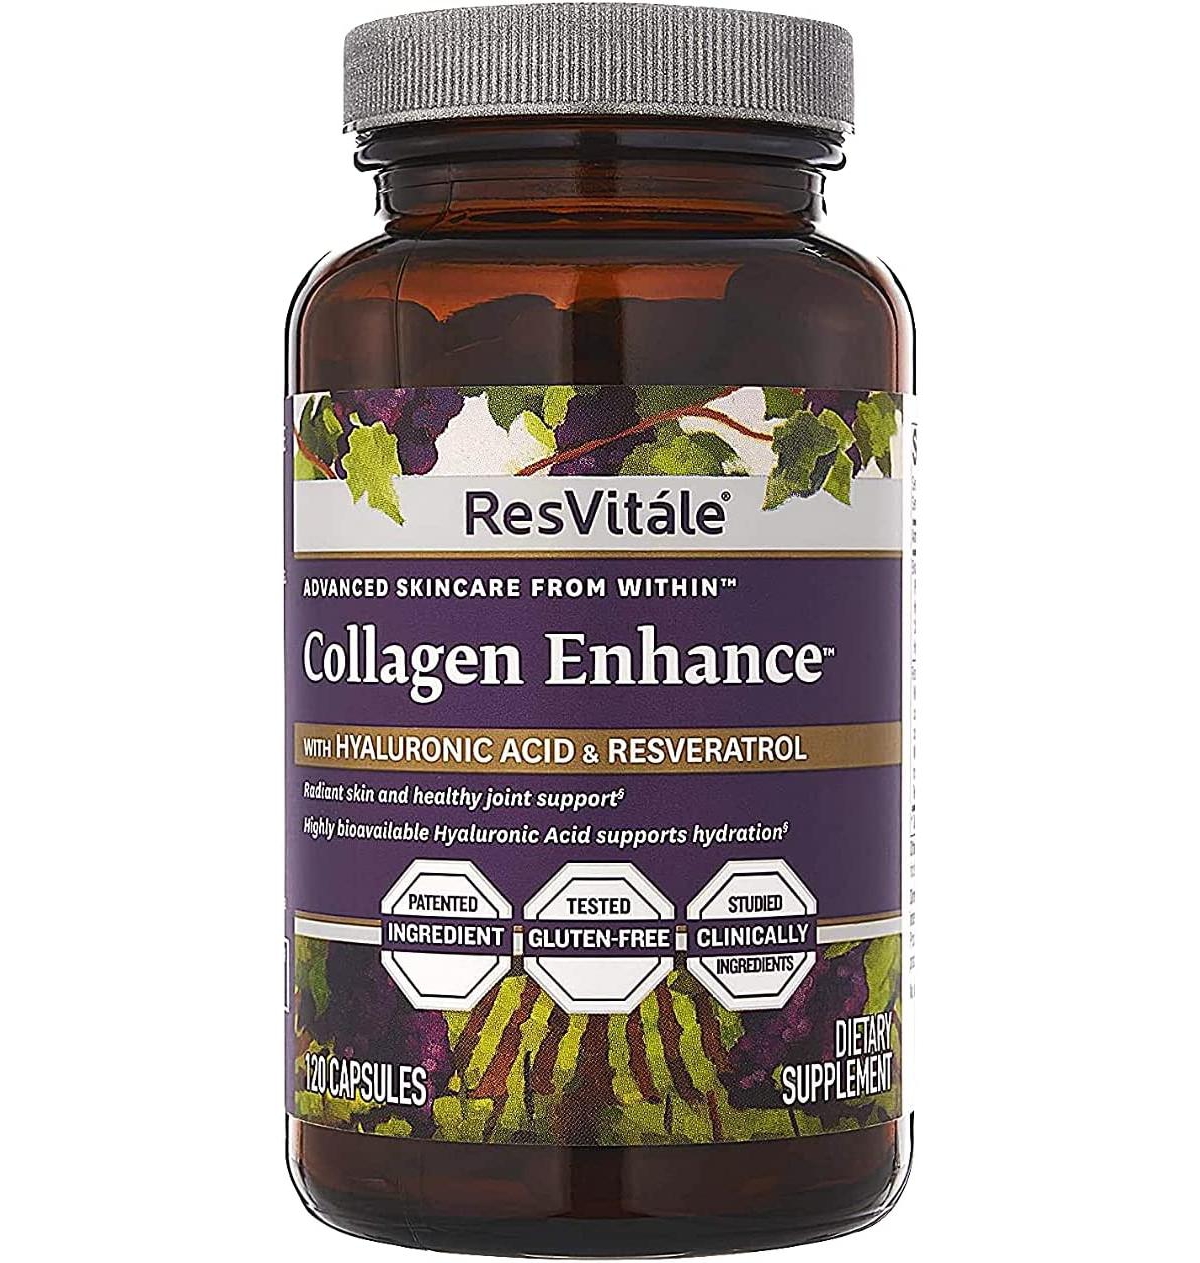 Collagen Enhance Anti Aging Skin Care Collagen Supplement - Hydrolyzed Collagen Peptides with Hyaluronic Acid and Resveratrol - Skin Food &